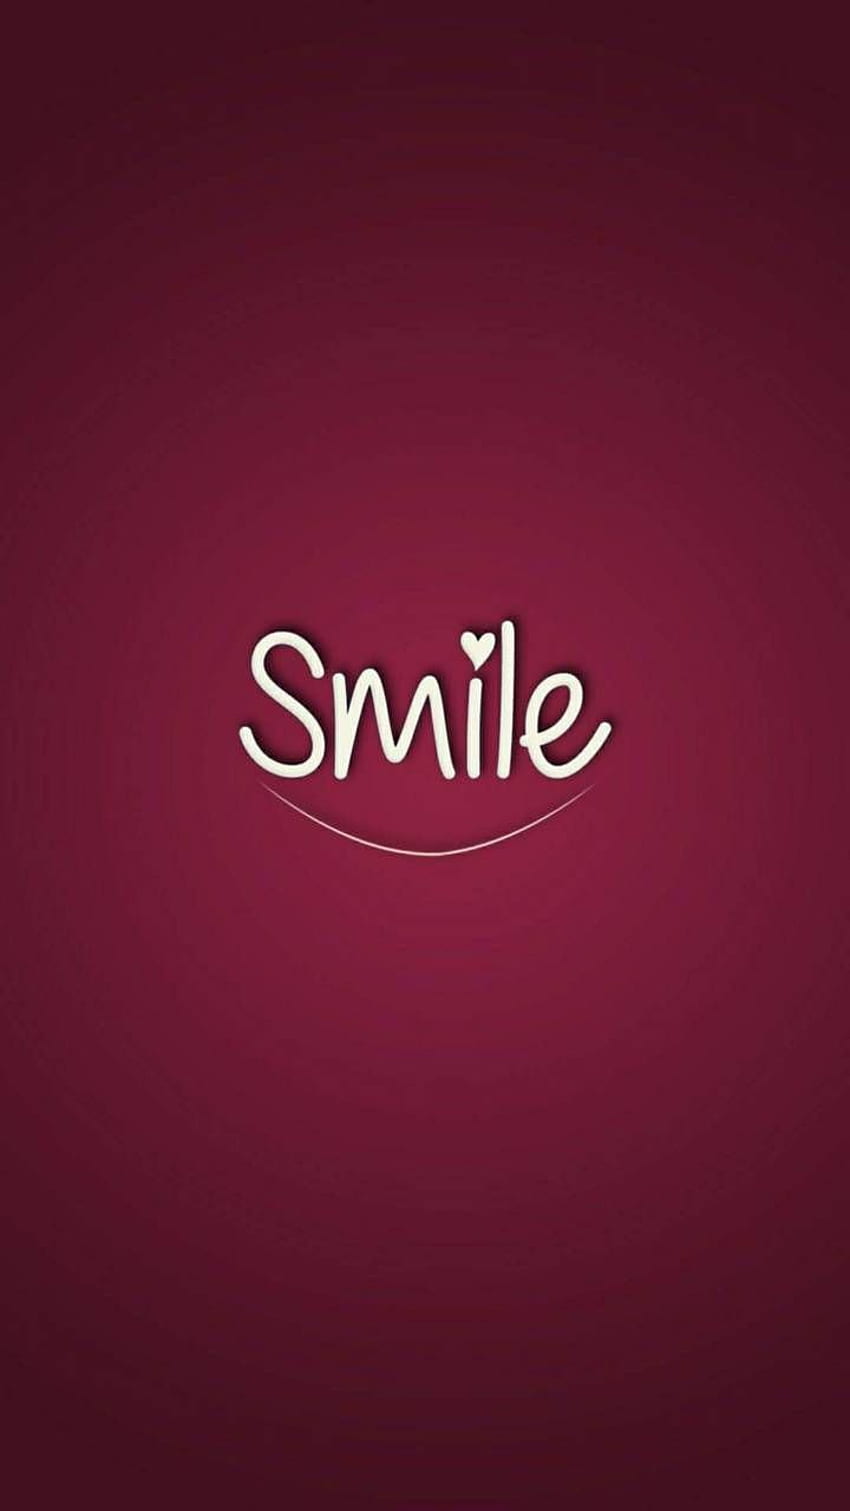 Smile - by ZEDGEâ, Just Smile HD phone wallpaper